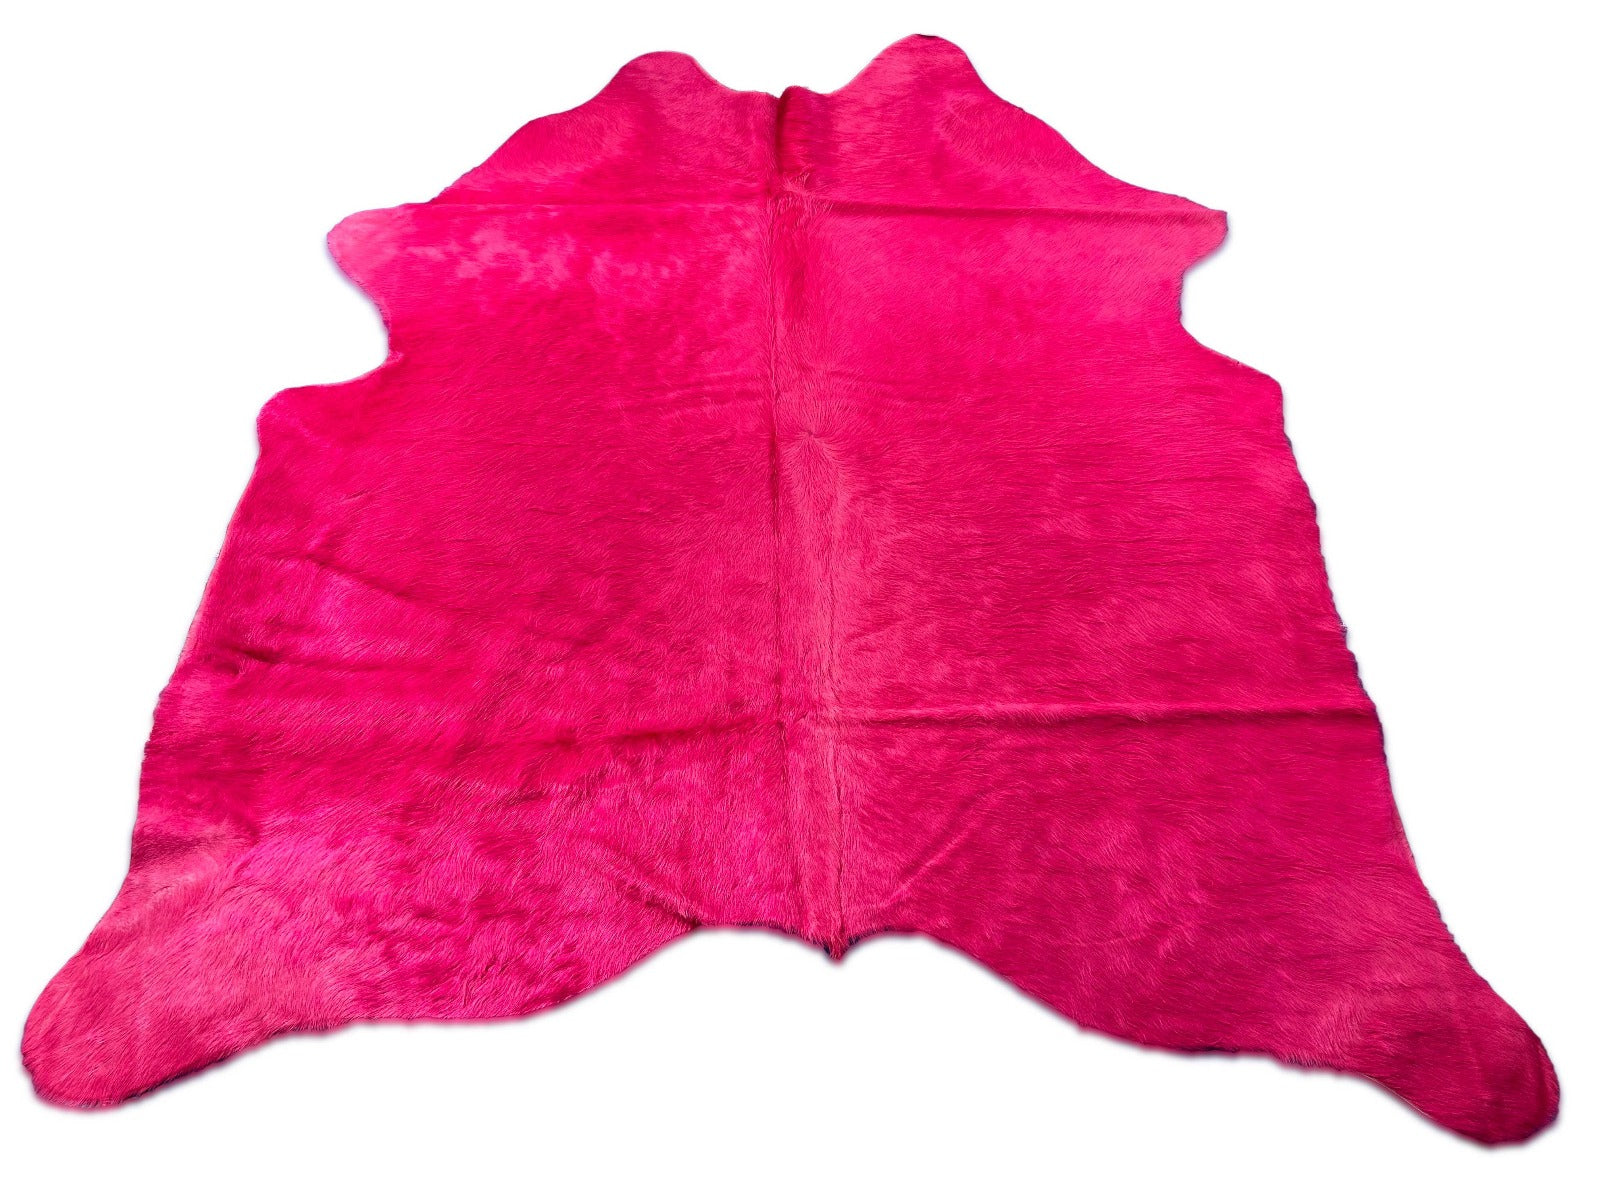 Dyed Light Pink Cowhide Rug Size: 7x6.5 feet C-1854